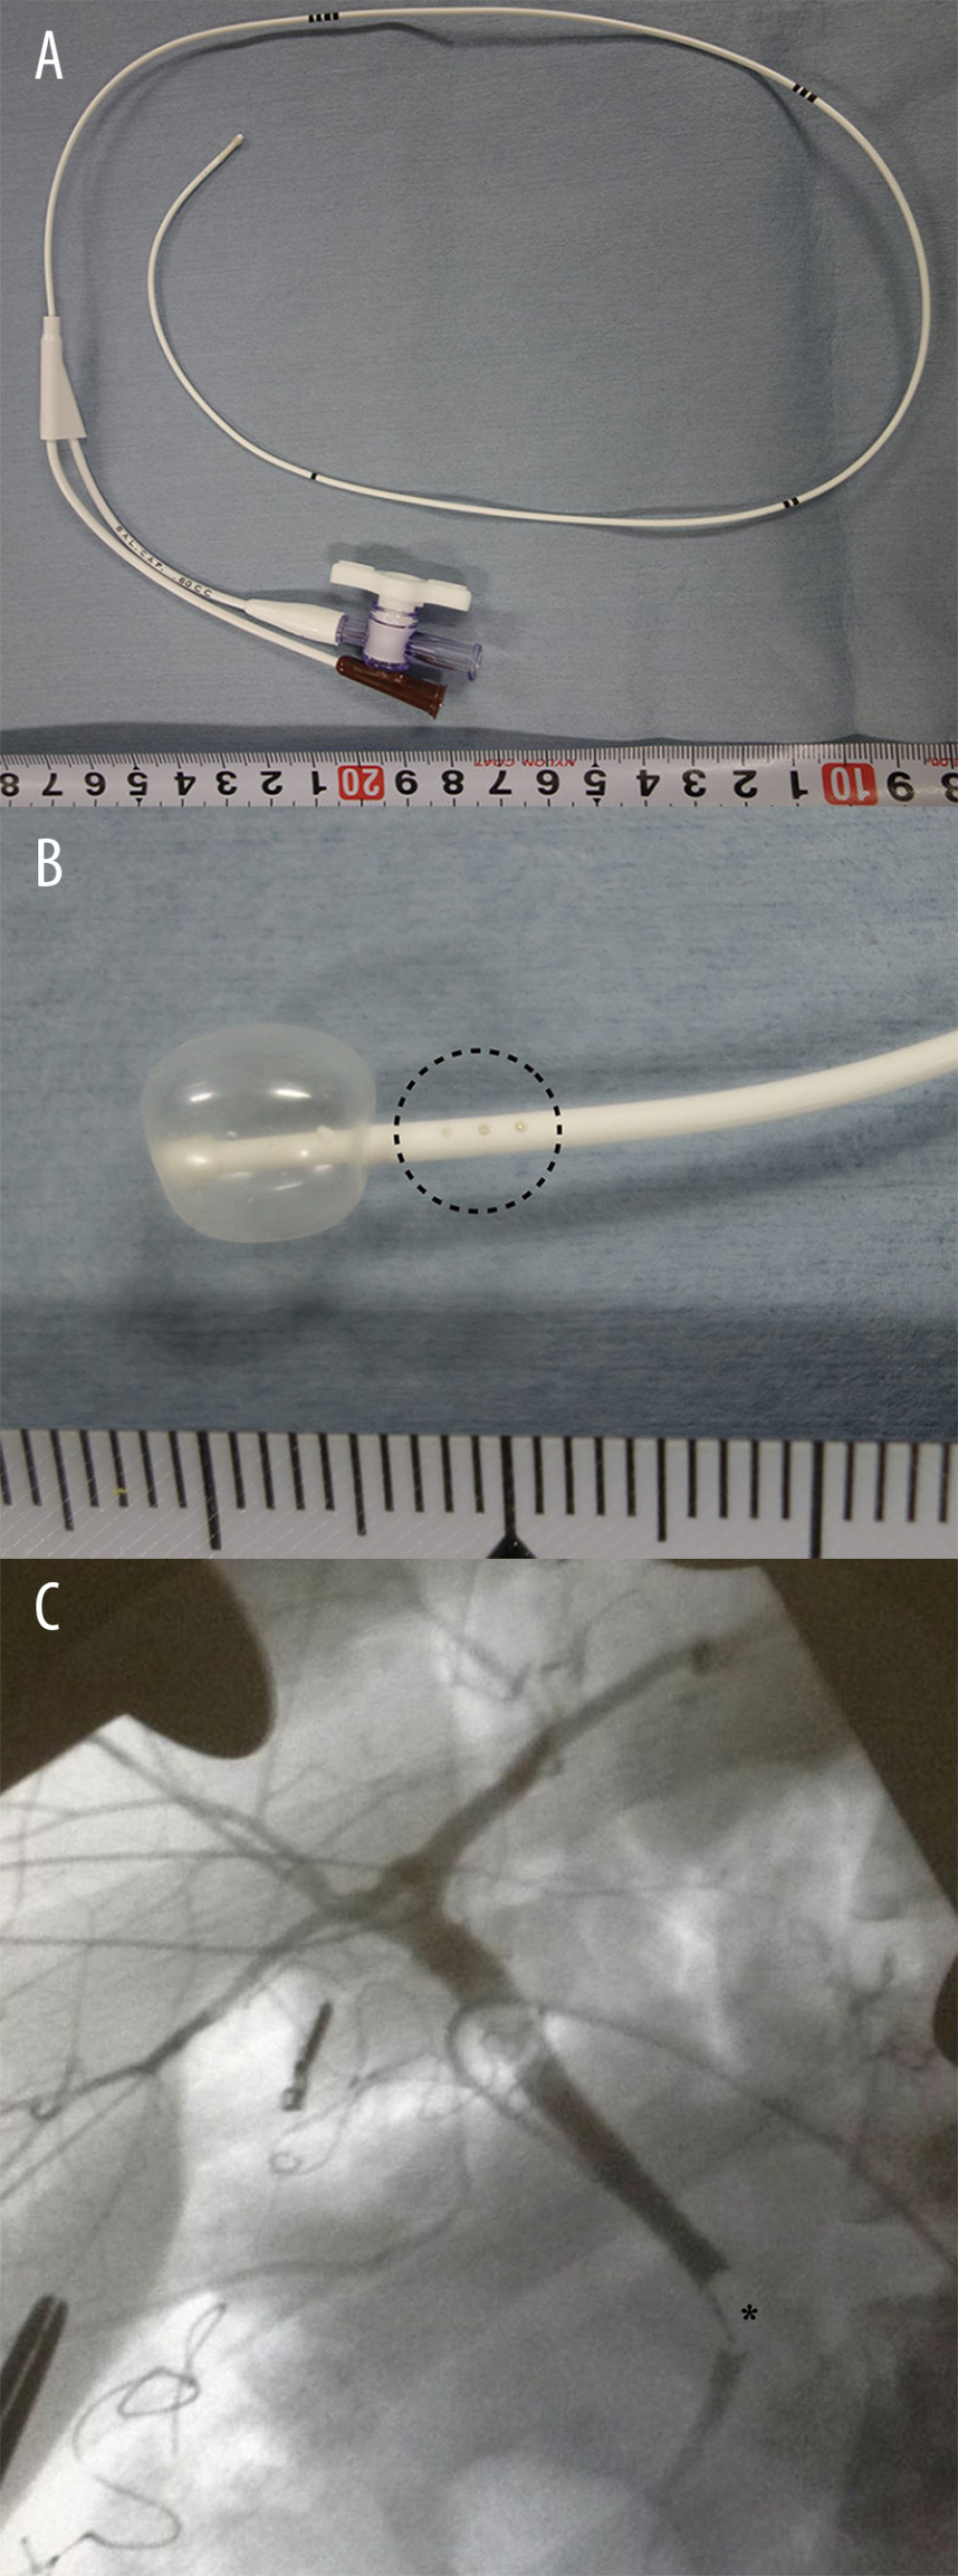 (A) Arrow Berman Angiographic Catheter, length 50 cm, external diameter 1.4 mm (4 Fr). The catheter is marked every 10 cm from the tip of the catheter. The air inlet to inflate the balloon has a stopcock. (B) Enlarged view of the tip of the catheter with the balloon inflated. The 3 side holes located at the proximal end of the balloon are circled with a dashed line. The balloon is inflated with 0.6 mL of air. (C) Intraoperative cholangiography of the living donor liver. The balloon is inflated in the distal bile duct (*). The biliary tree is peripherally enhanced.